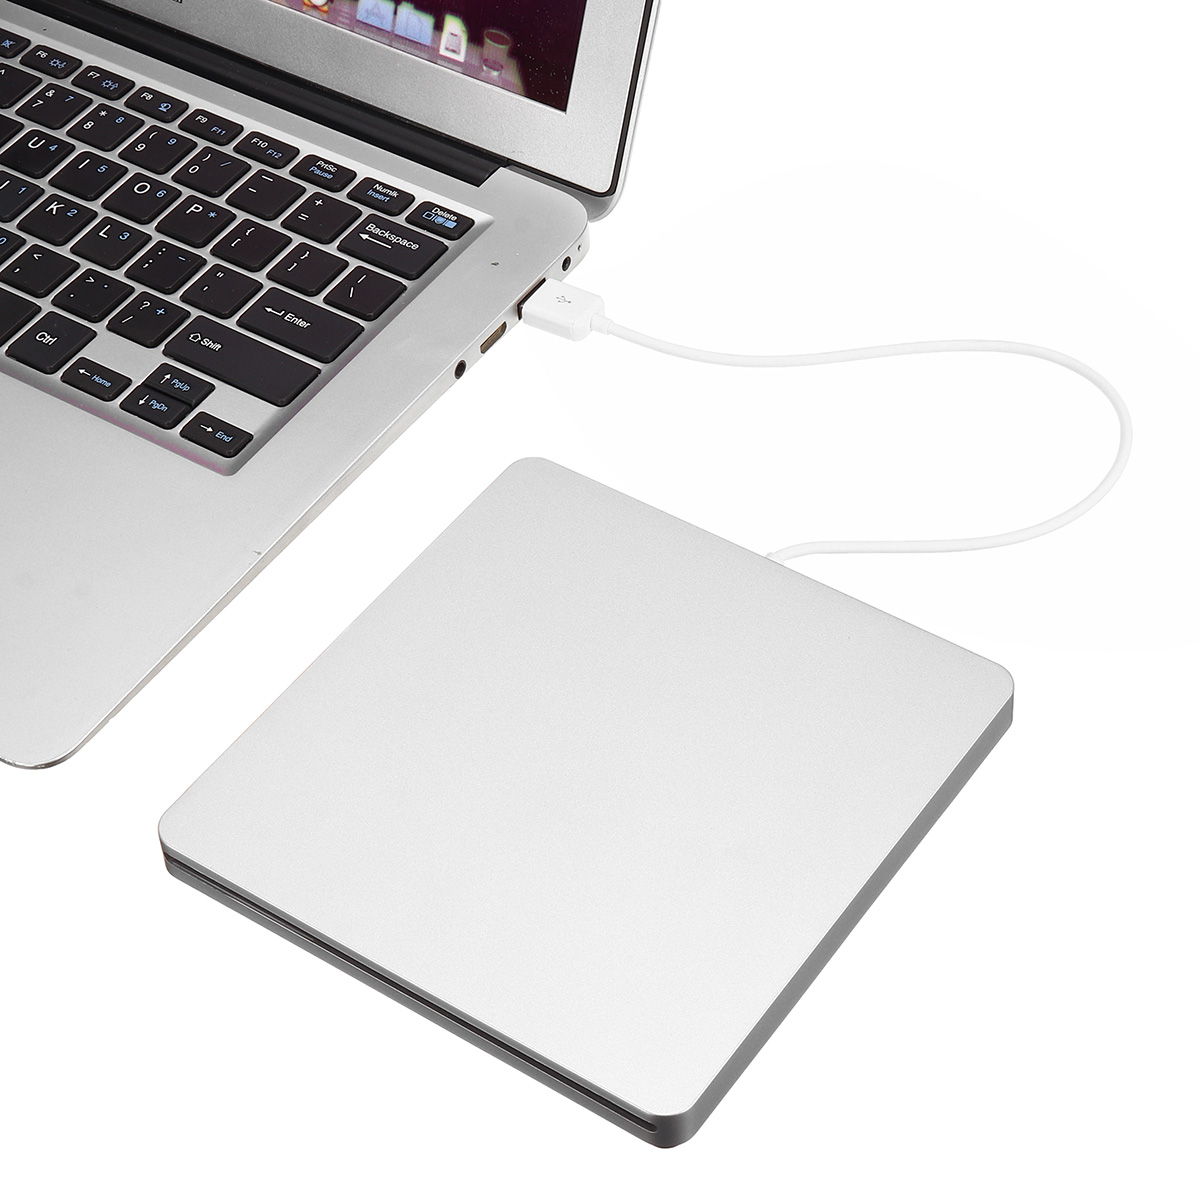 Portable-USB-30-Silver-External-DVD-RW-Max24X-High-speed-Data-Transmission-for-Win-XP-Win-7-Win-8-Wi-1701692-4